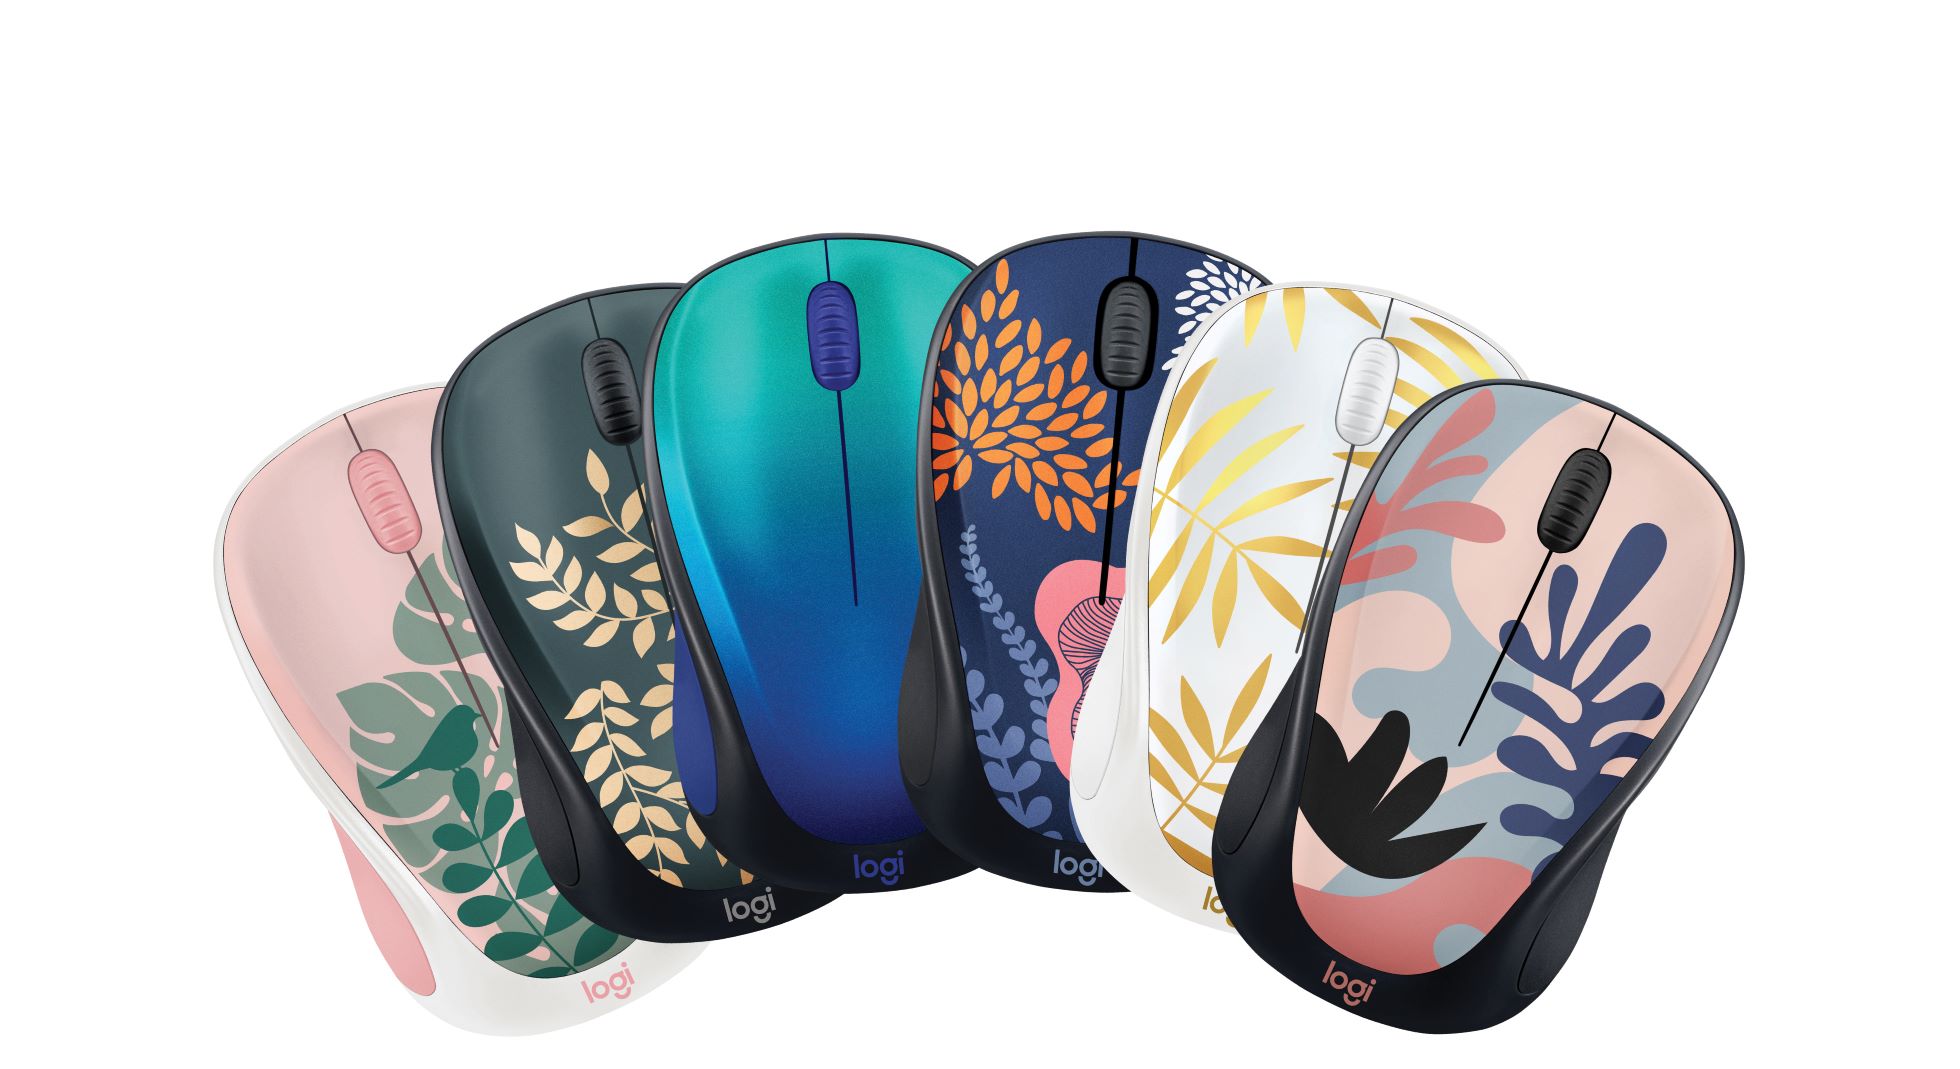 Make a Statement on Your Setup with Logitech’s Limited Edition Design Collection Wireless Mice